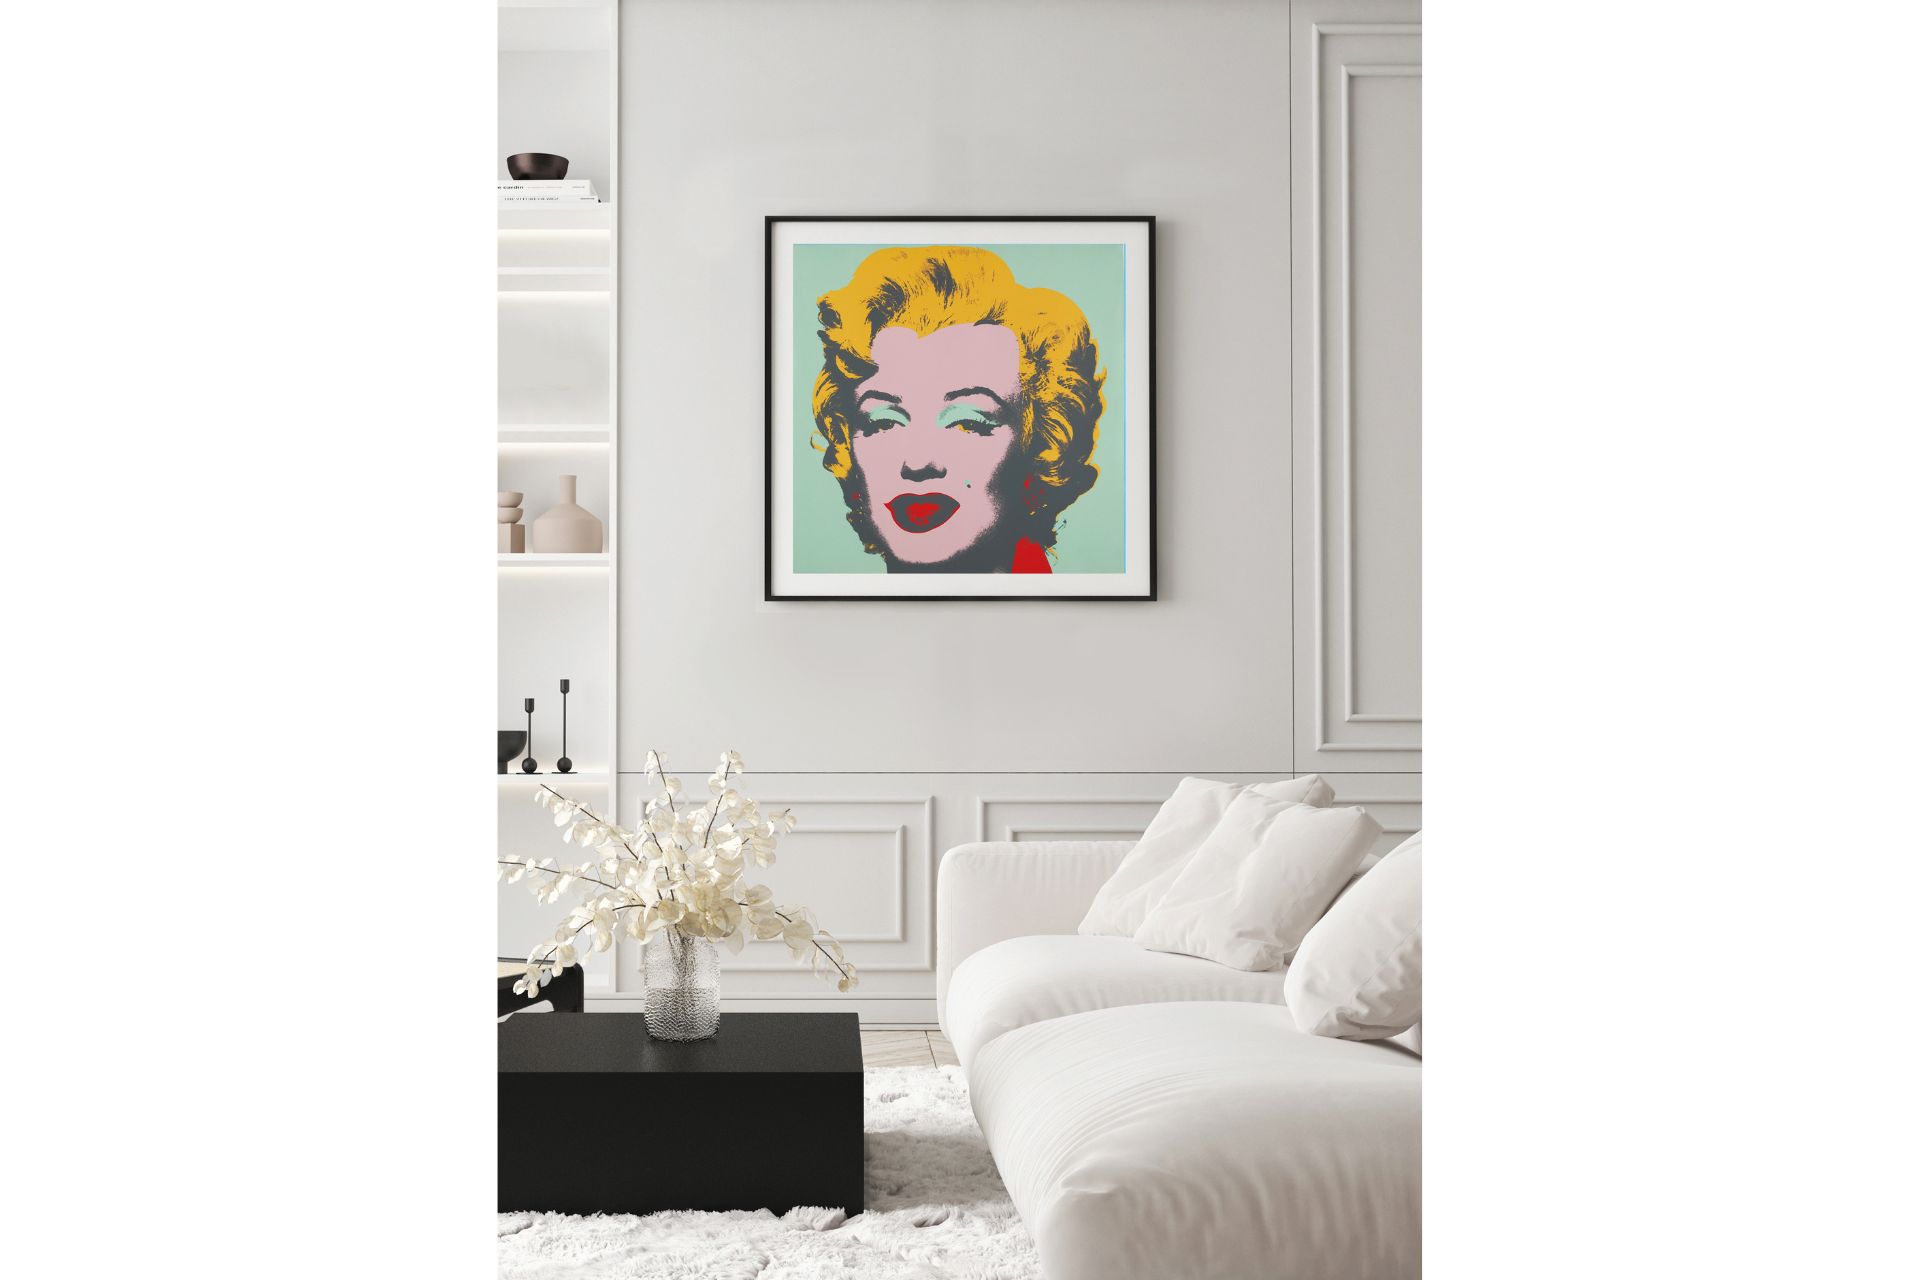 A painting of Marilyn Monroe by Andy Warhol on a wall